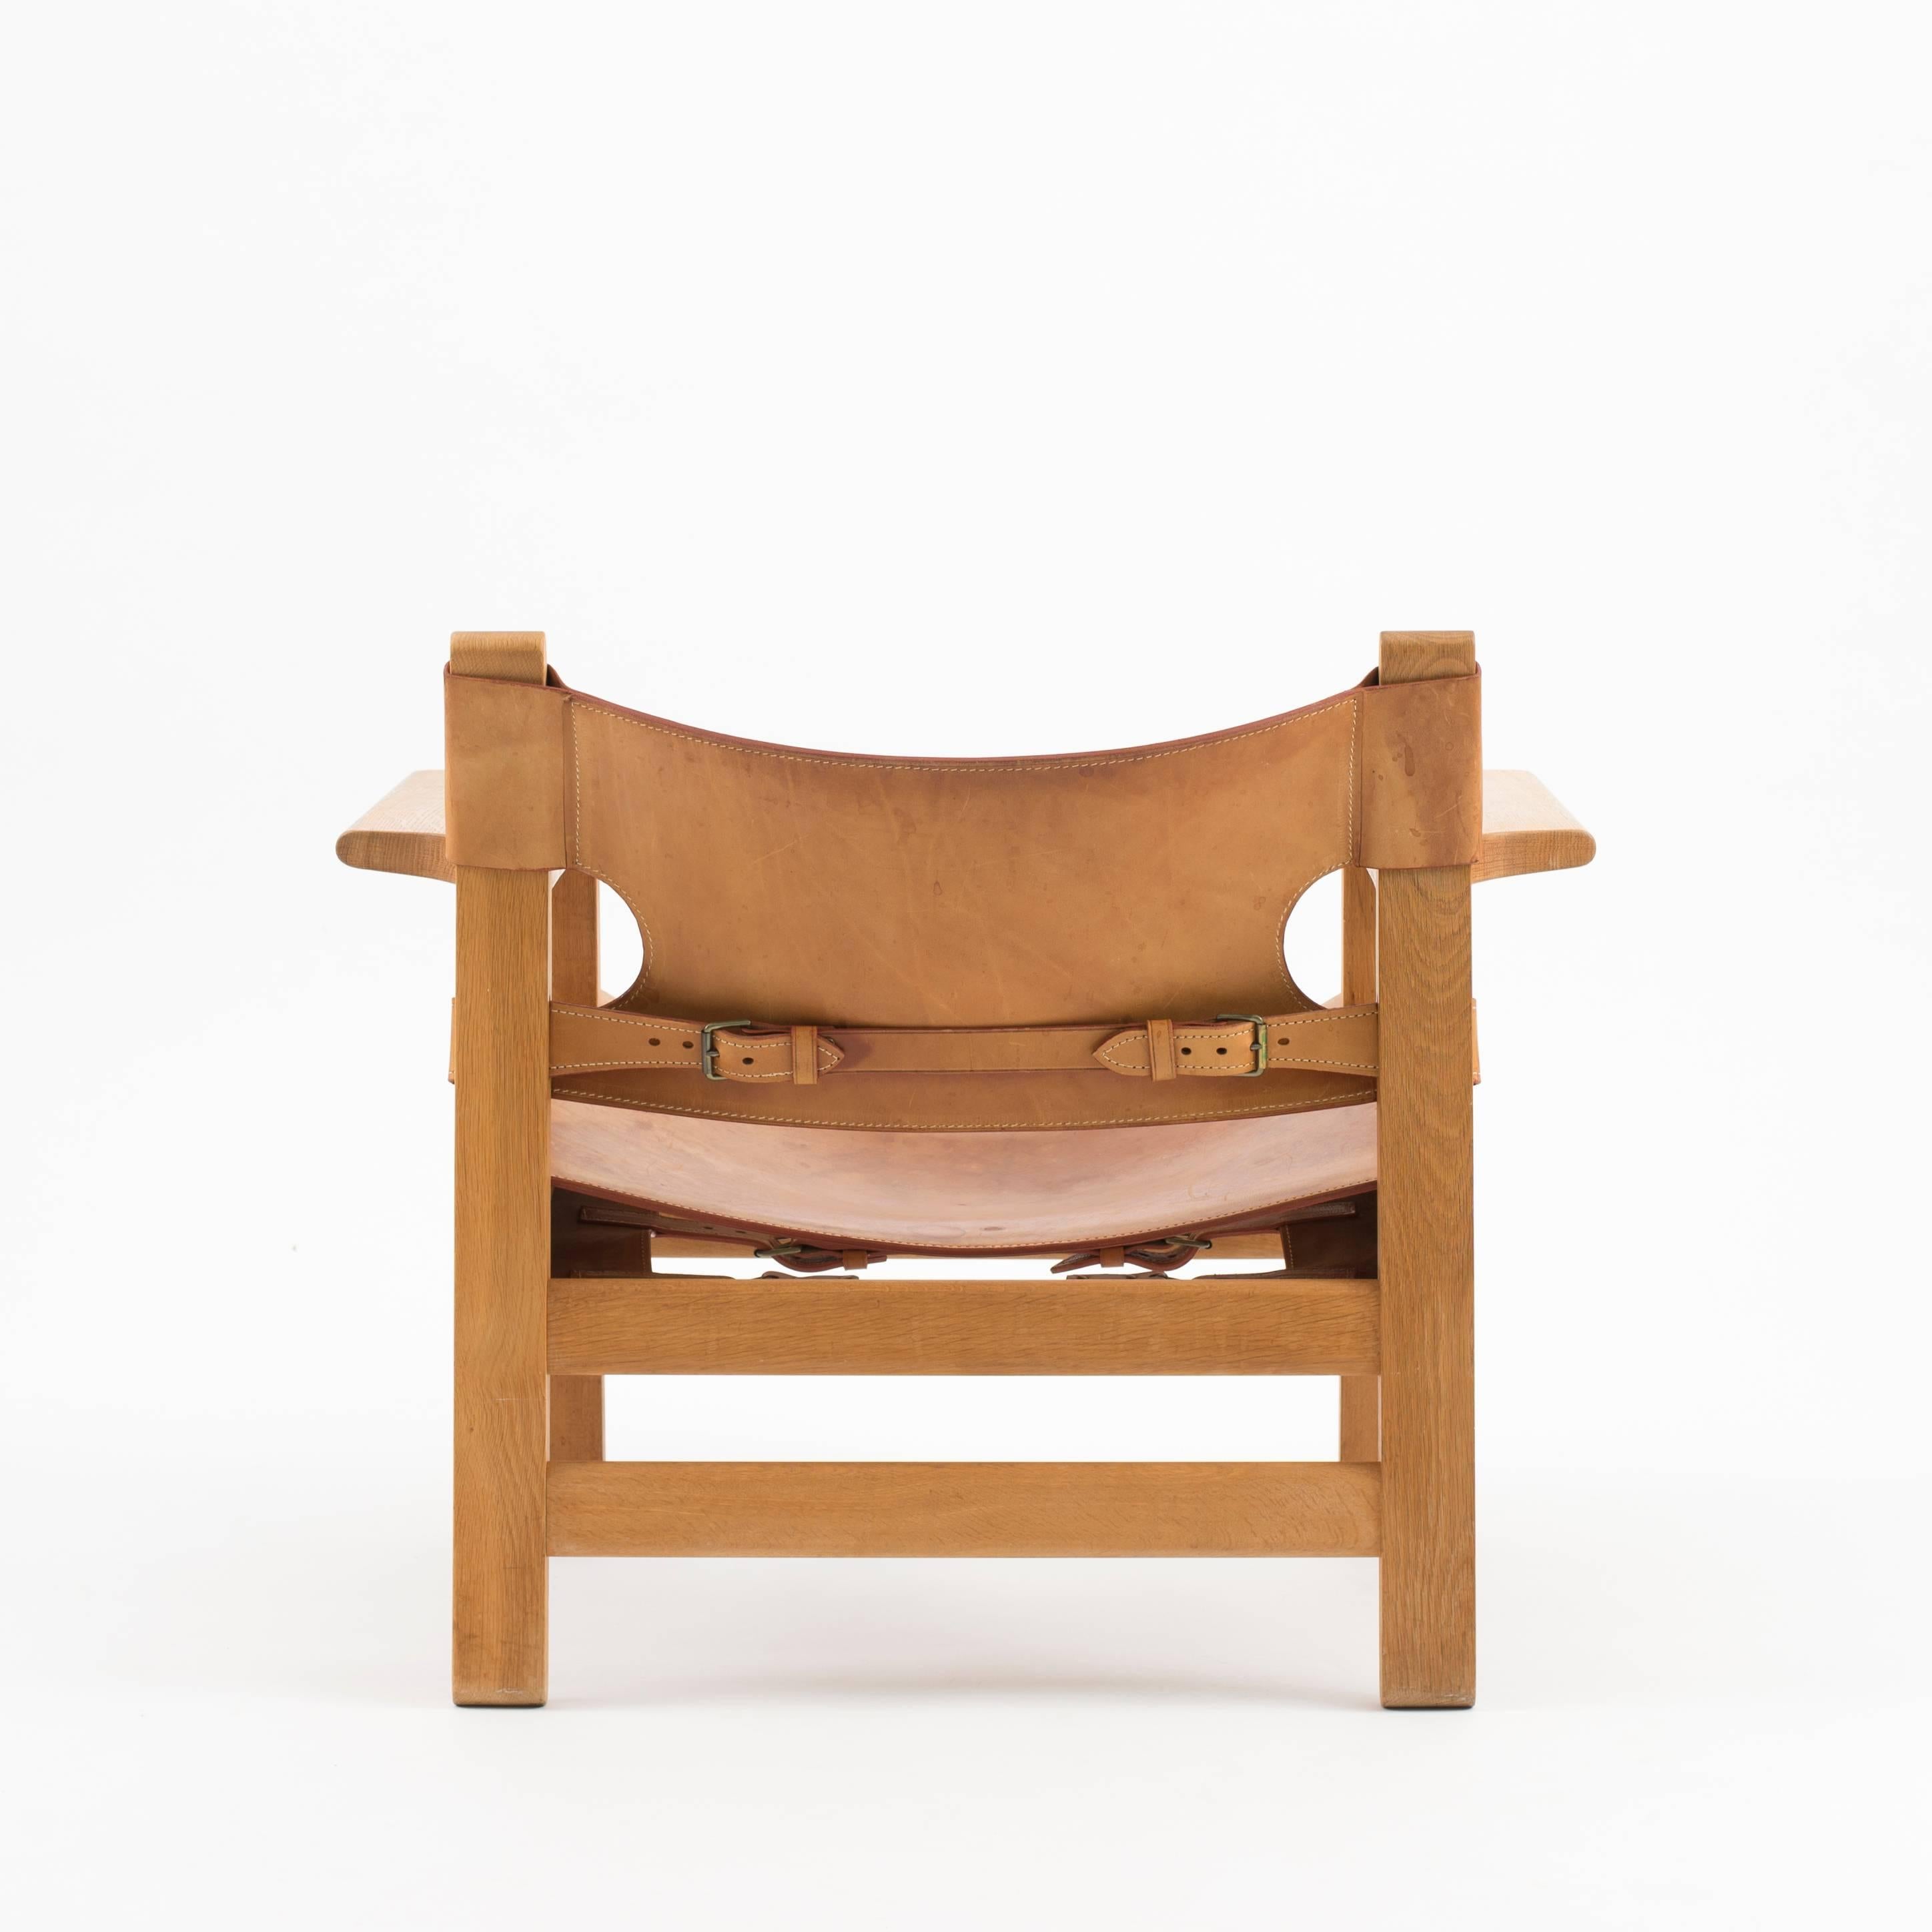 20th Century Pair of Spanish Chairs by Børge Mogensen for Fredericia Furniture